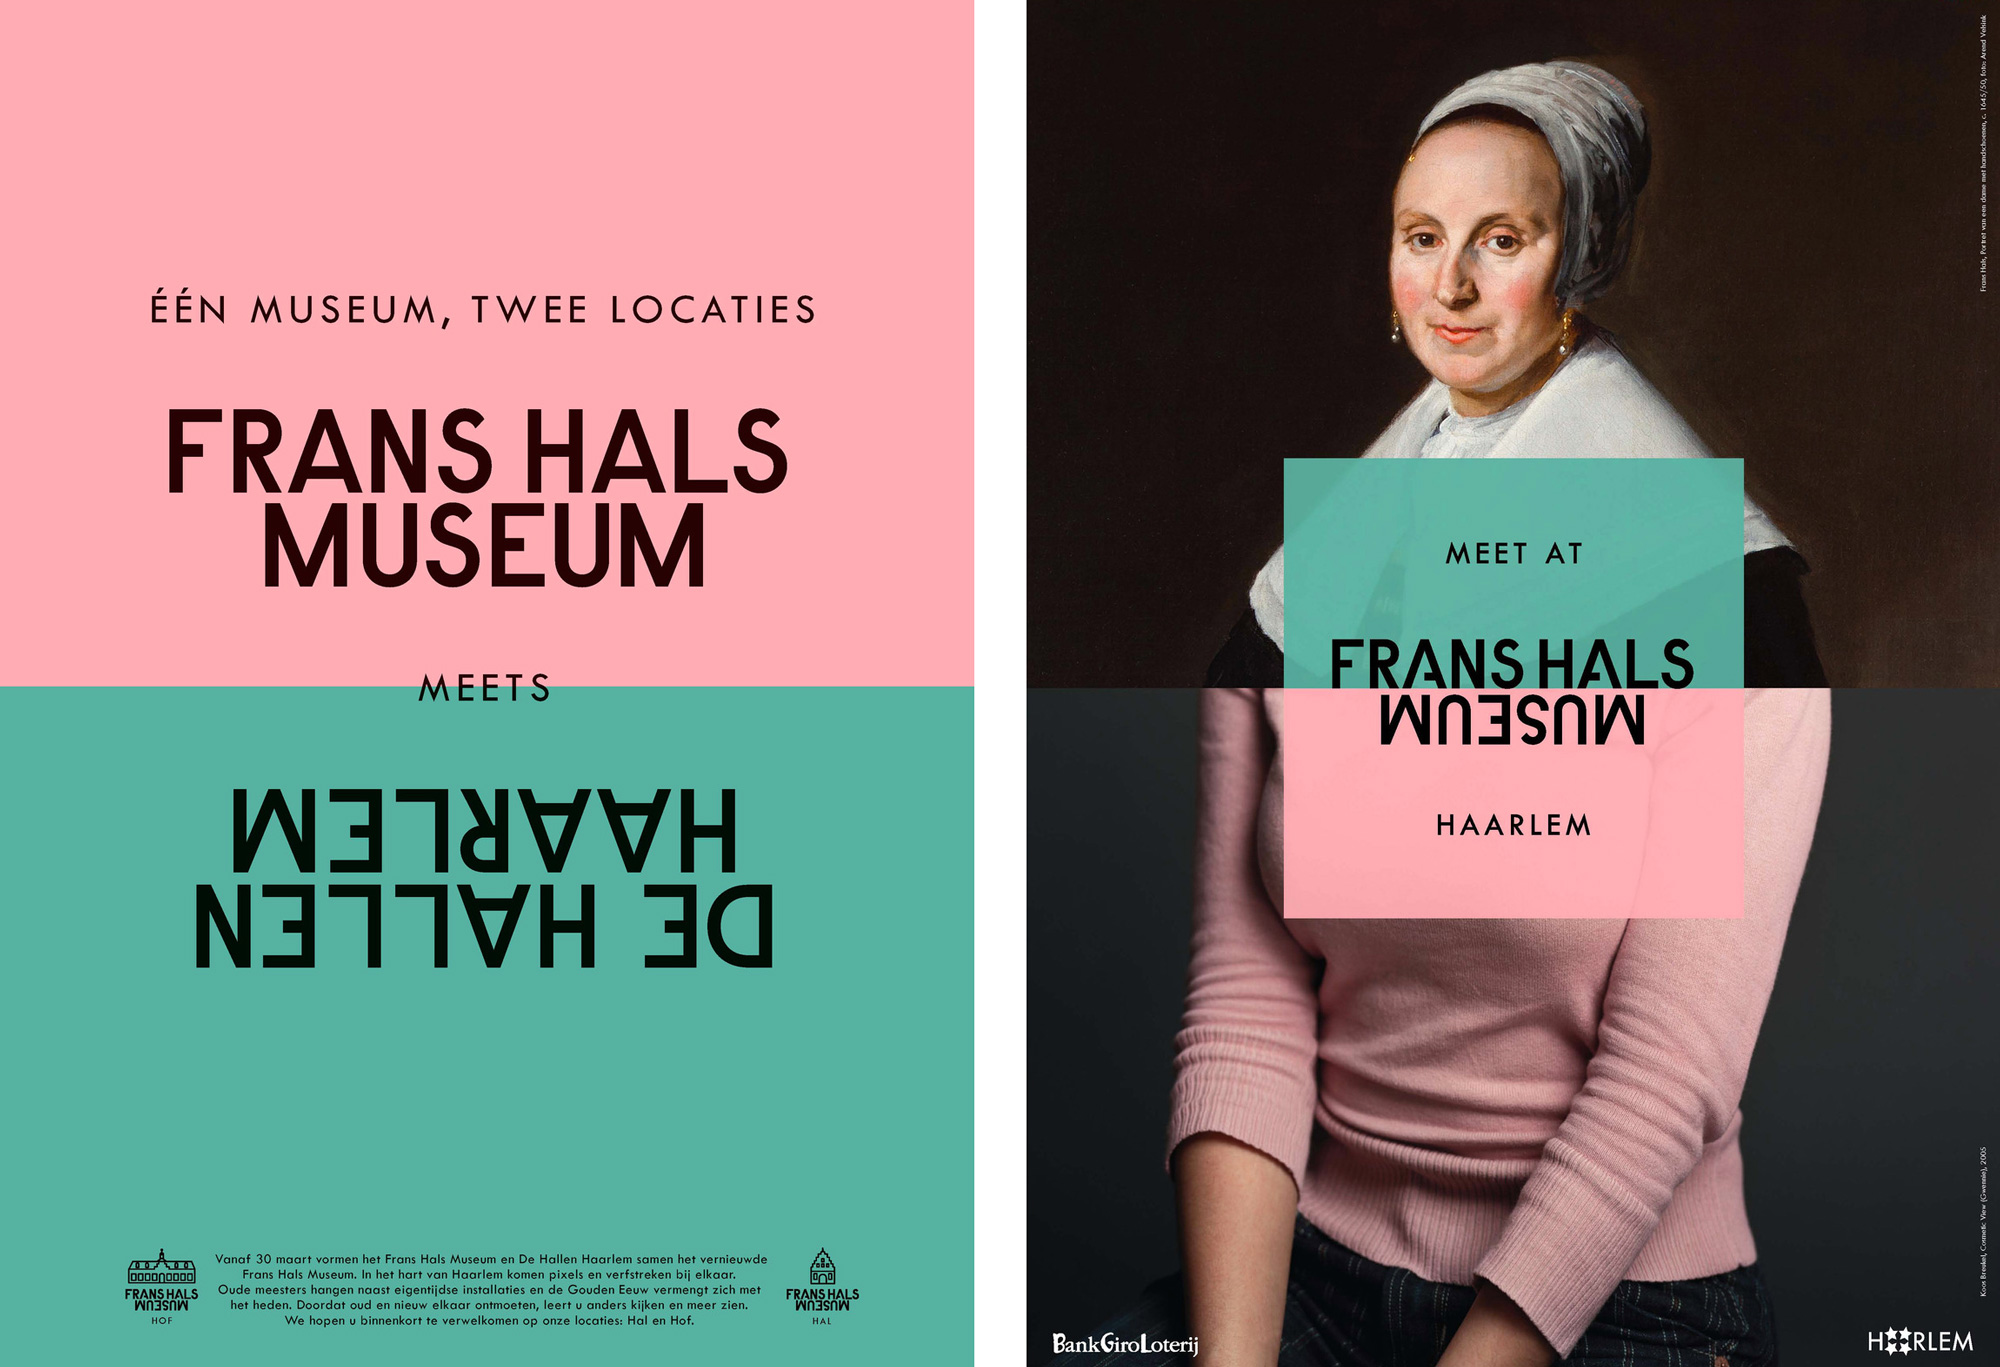 New Logo and Identity for Frans Hals Museum by KesselsKramer